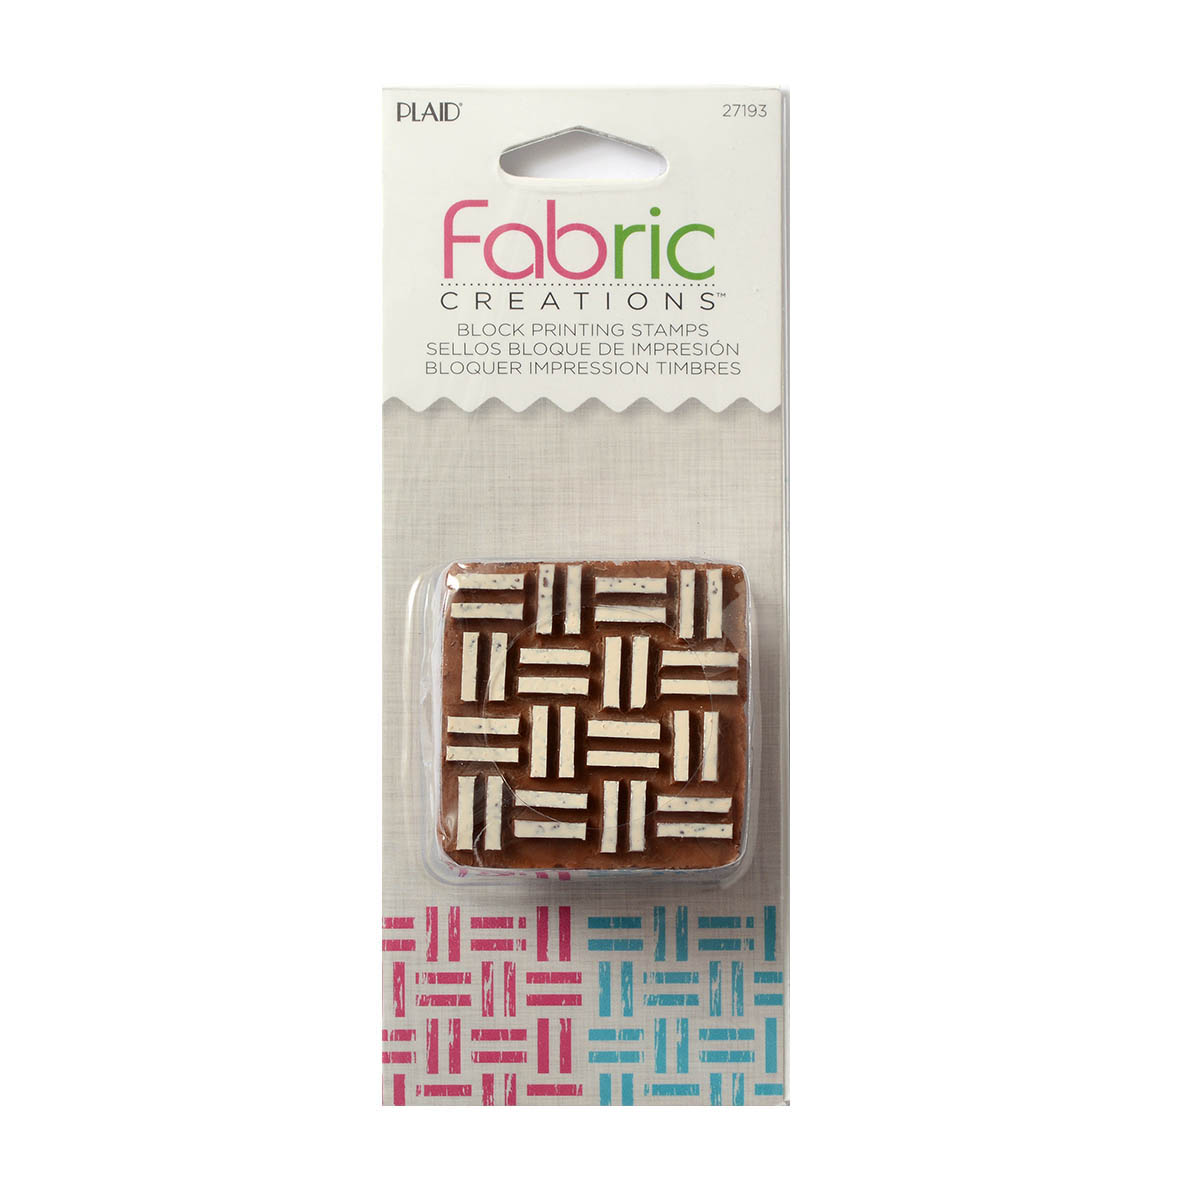 Fabric Creations™ Block Printing Stamps - Small - Basket Weave - 27193